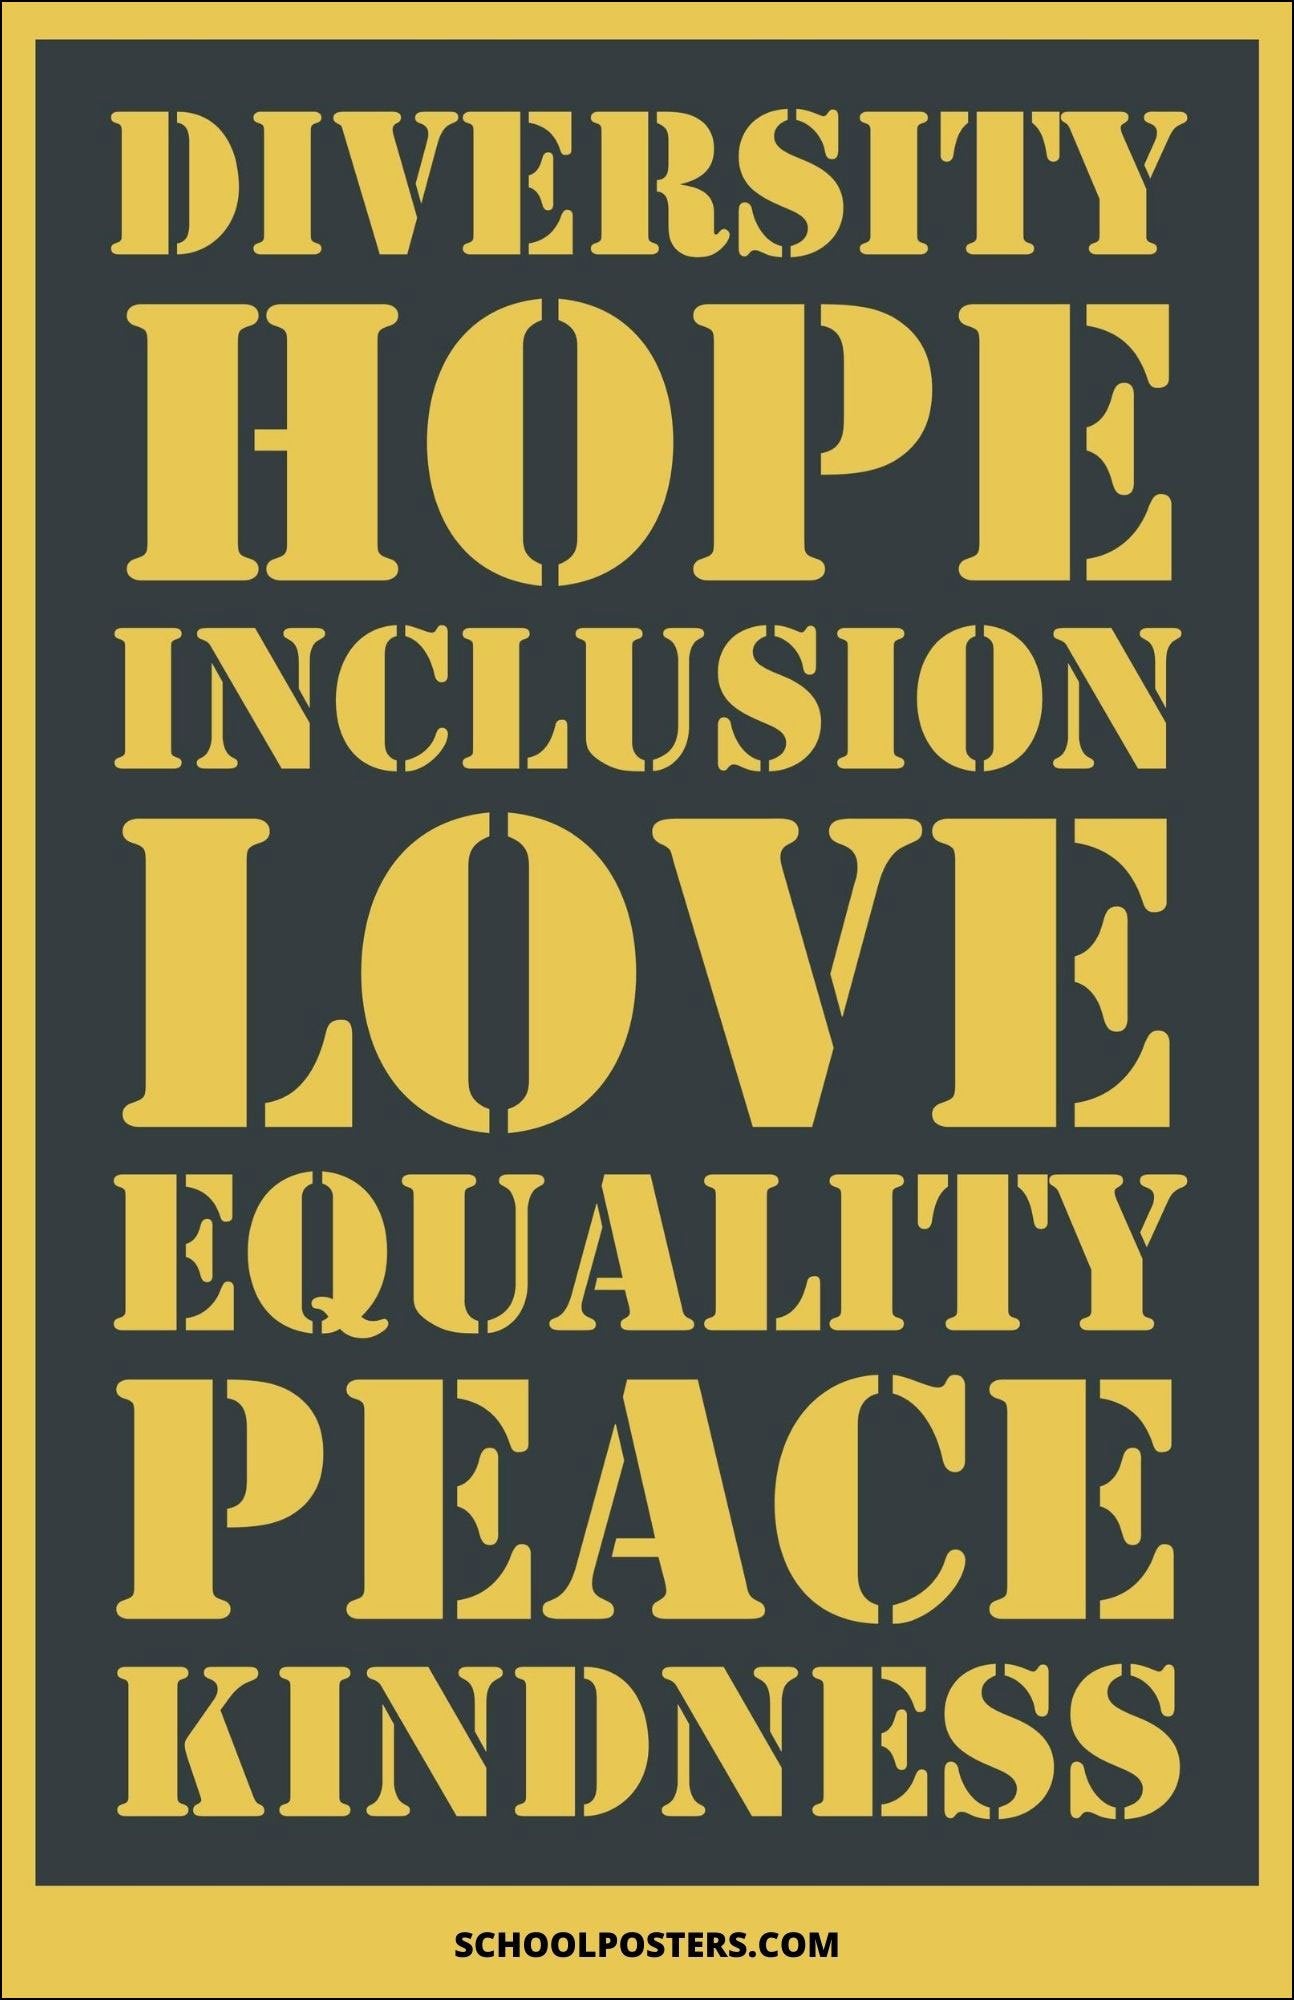 Diversity Hope Inclusion Love Equality Peace Kindness Poster